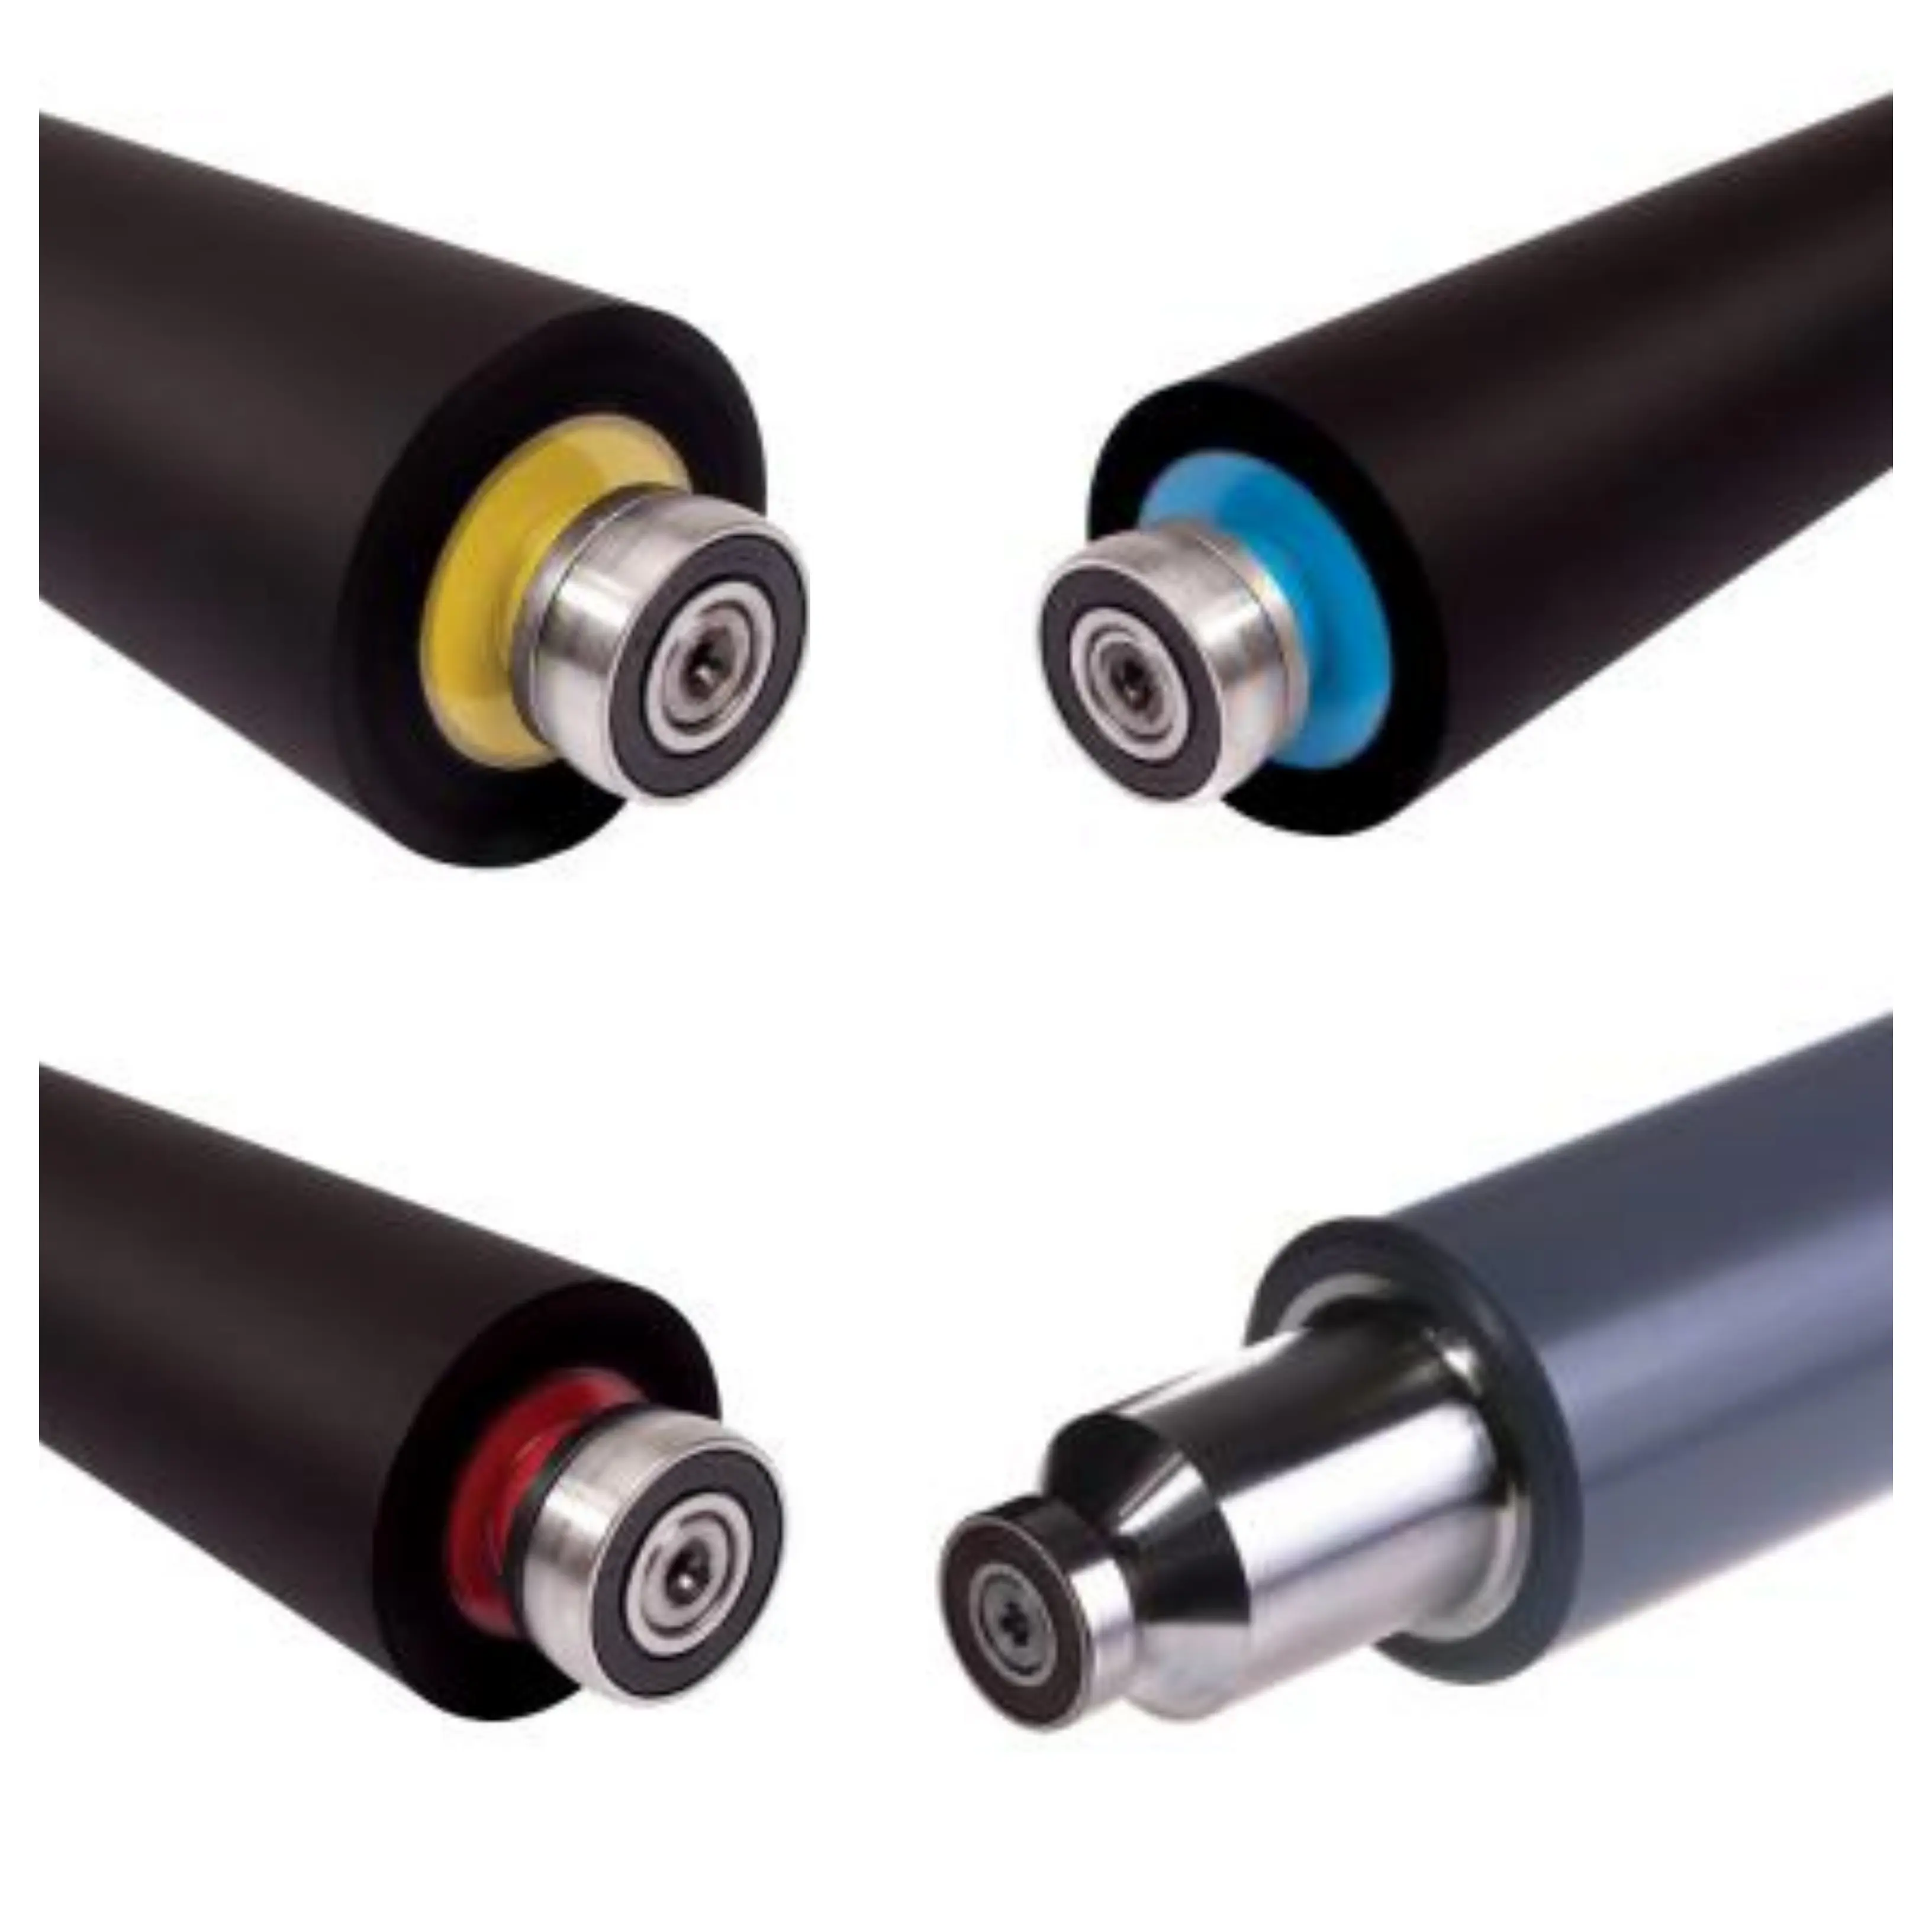 Wholesaler Price Heidelberg KORD rubber rollers Piece For Printing Machine at Manufacturer Supplier in india